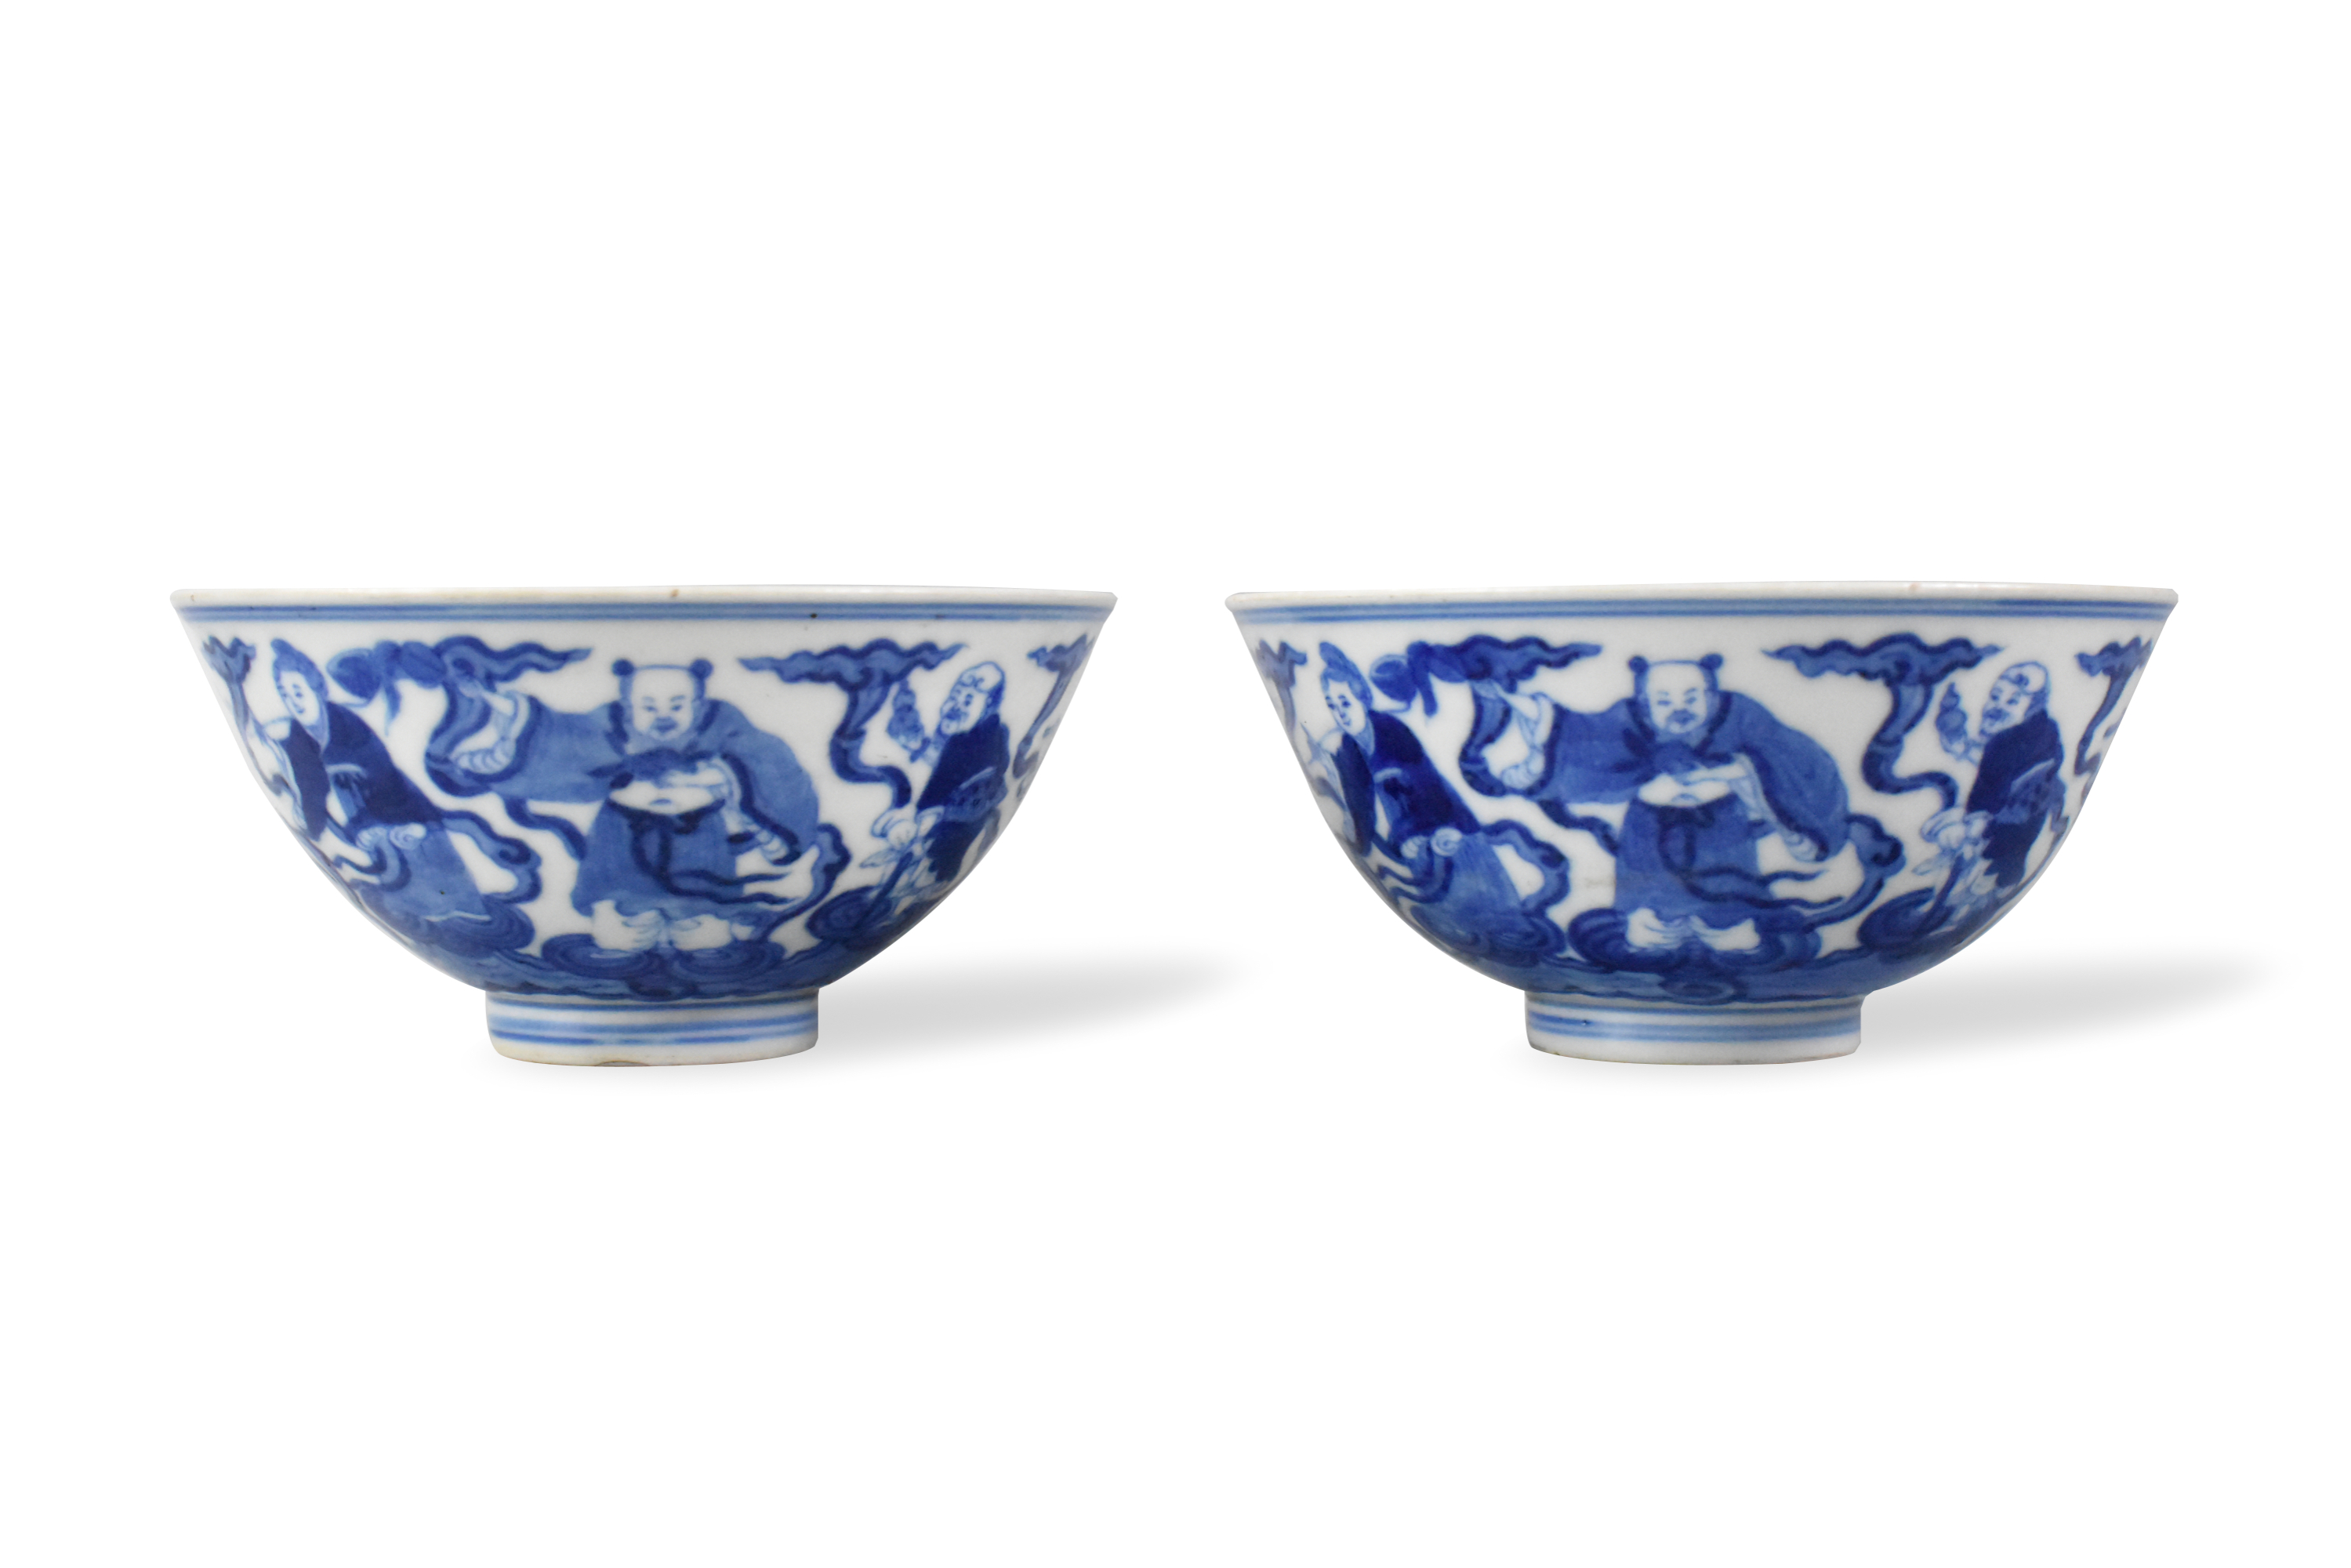 PAIR OF CHINESE B W 8 IMMORTAL 301ce9